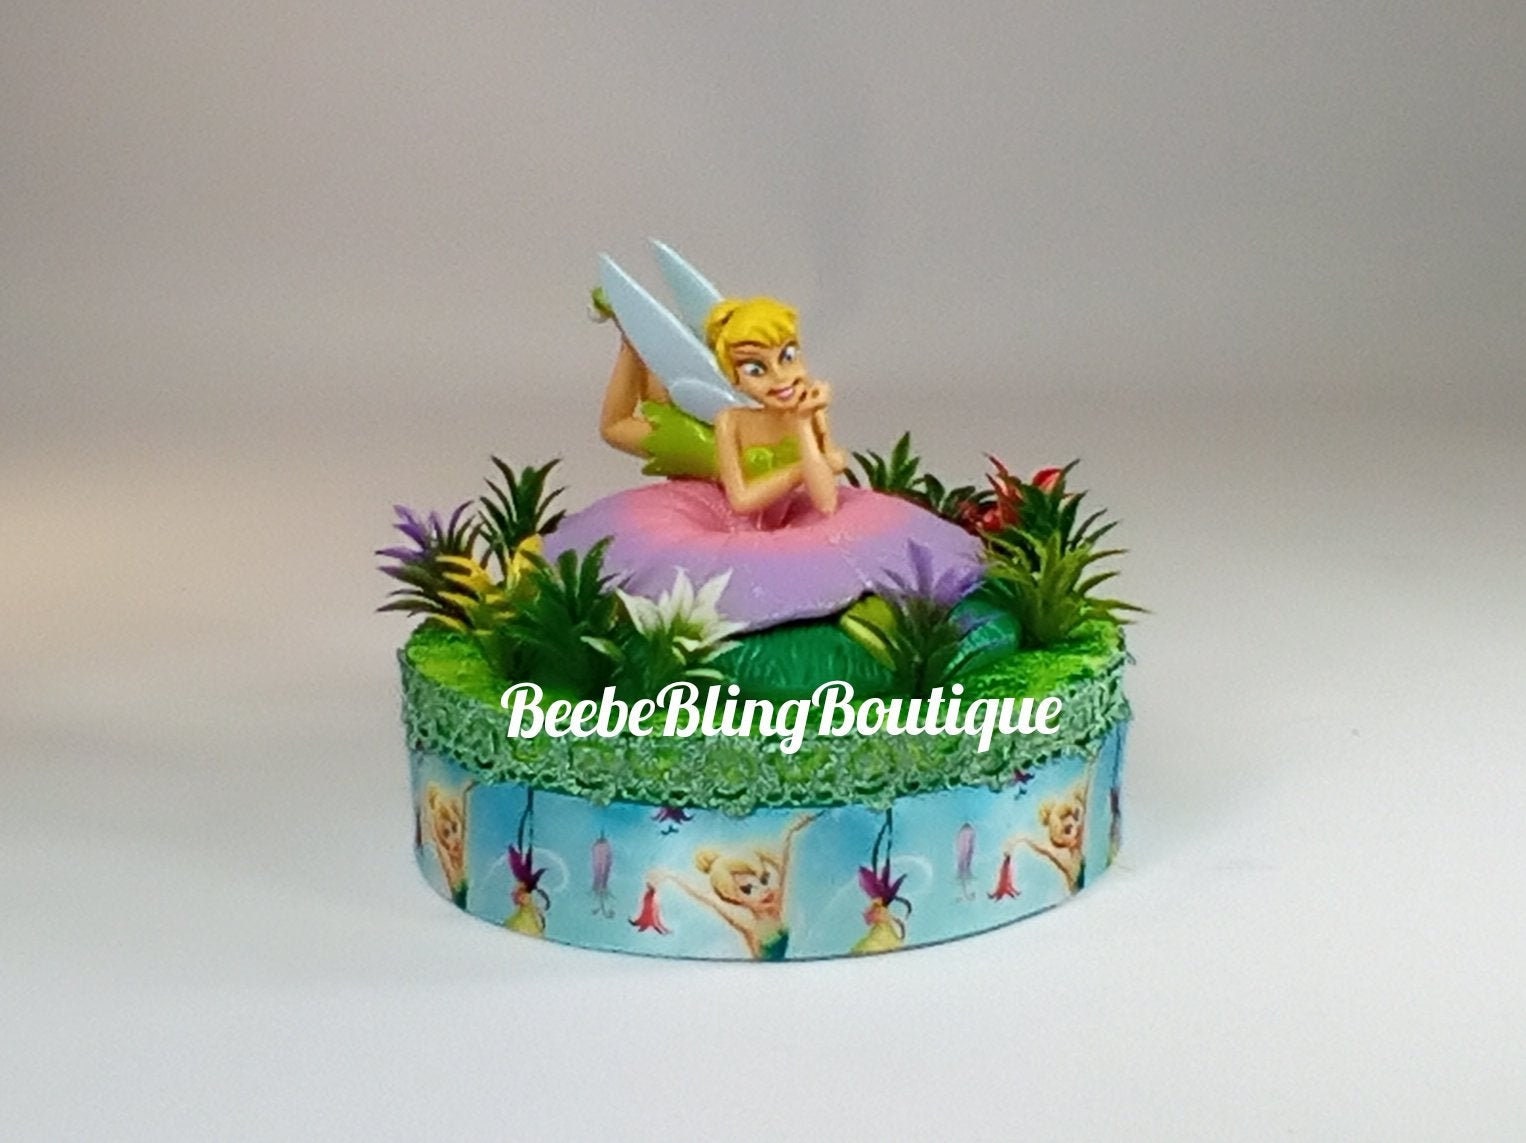 49 Cute Cake Ideas For Your Next Celebration : Tinkerbell cake